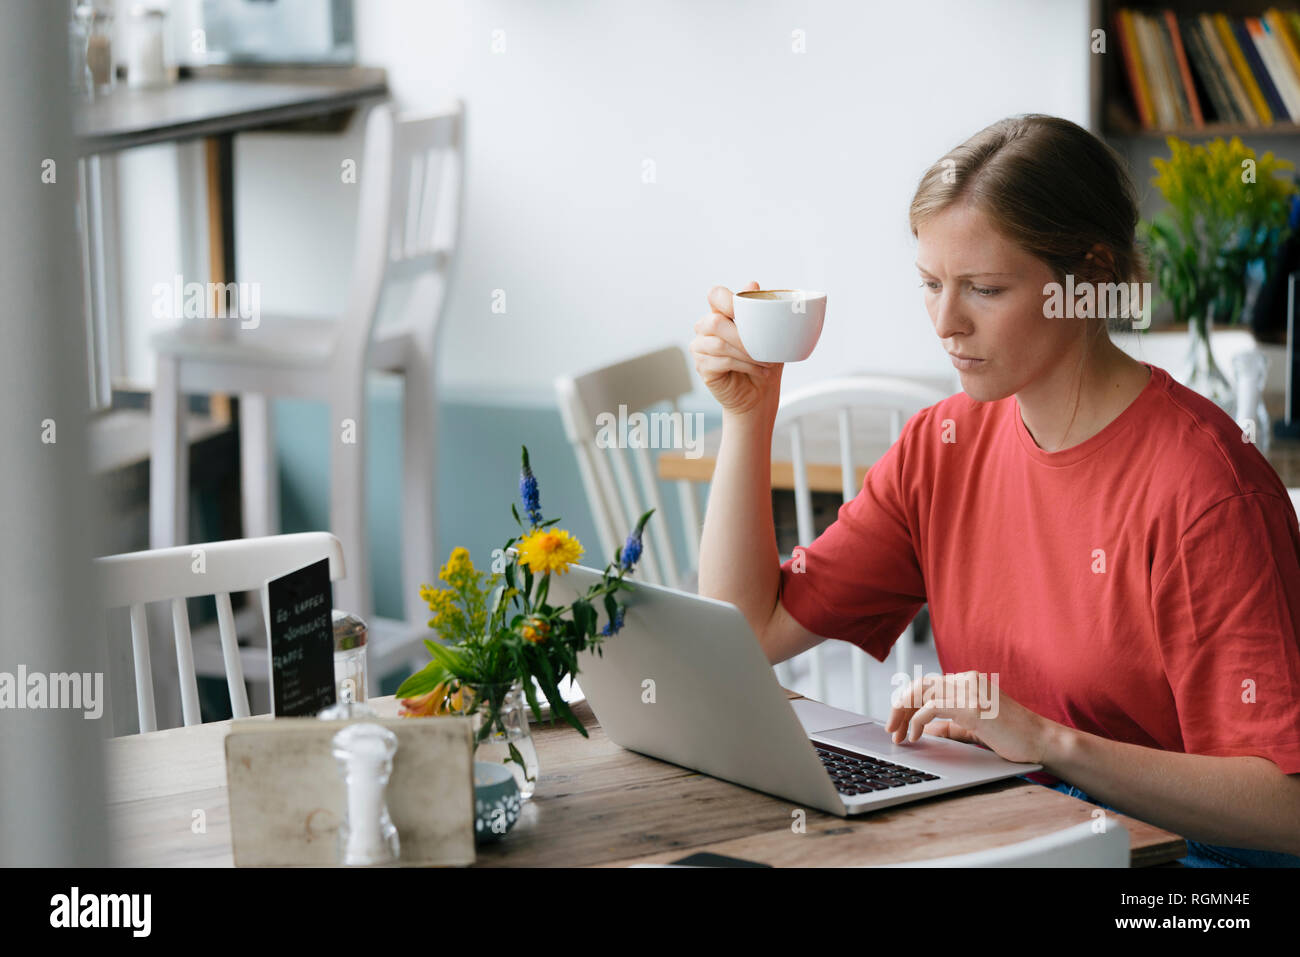 Young woman using laptop at table in a cafe Stock Photo